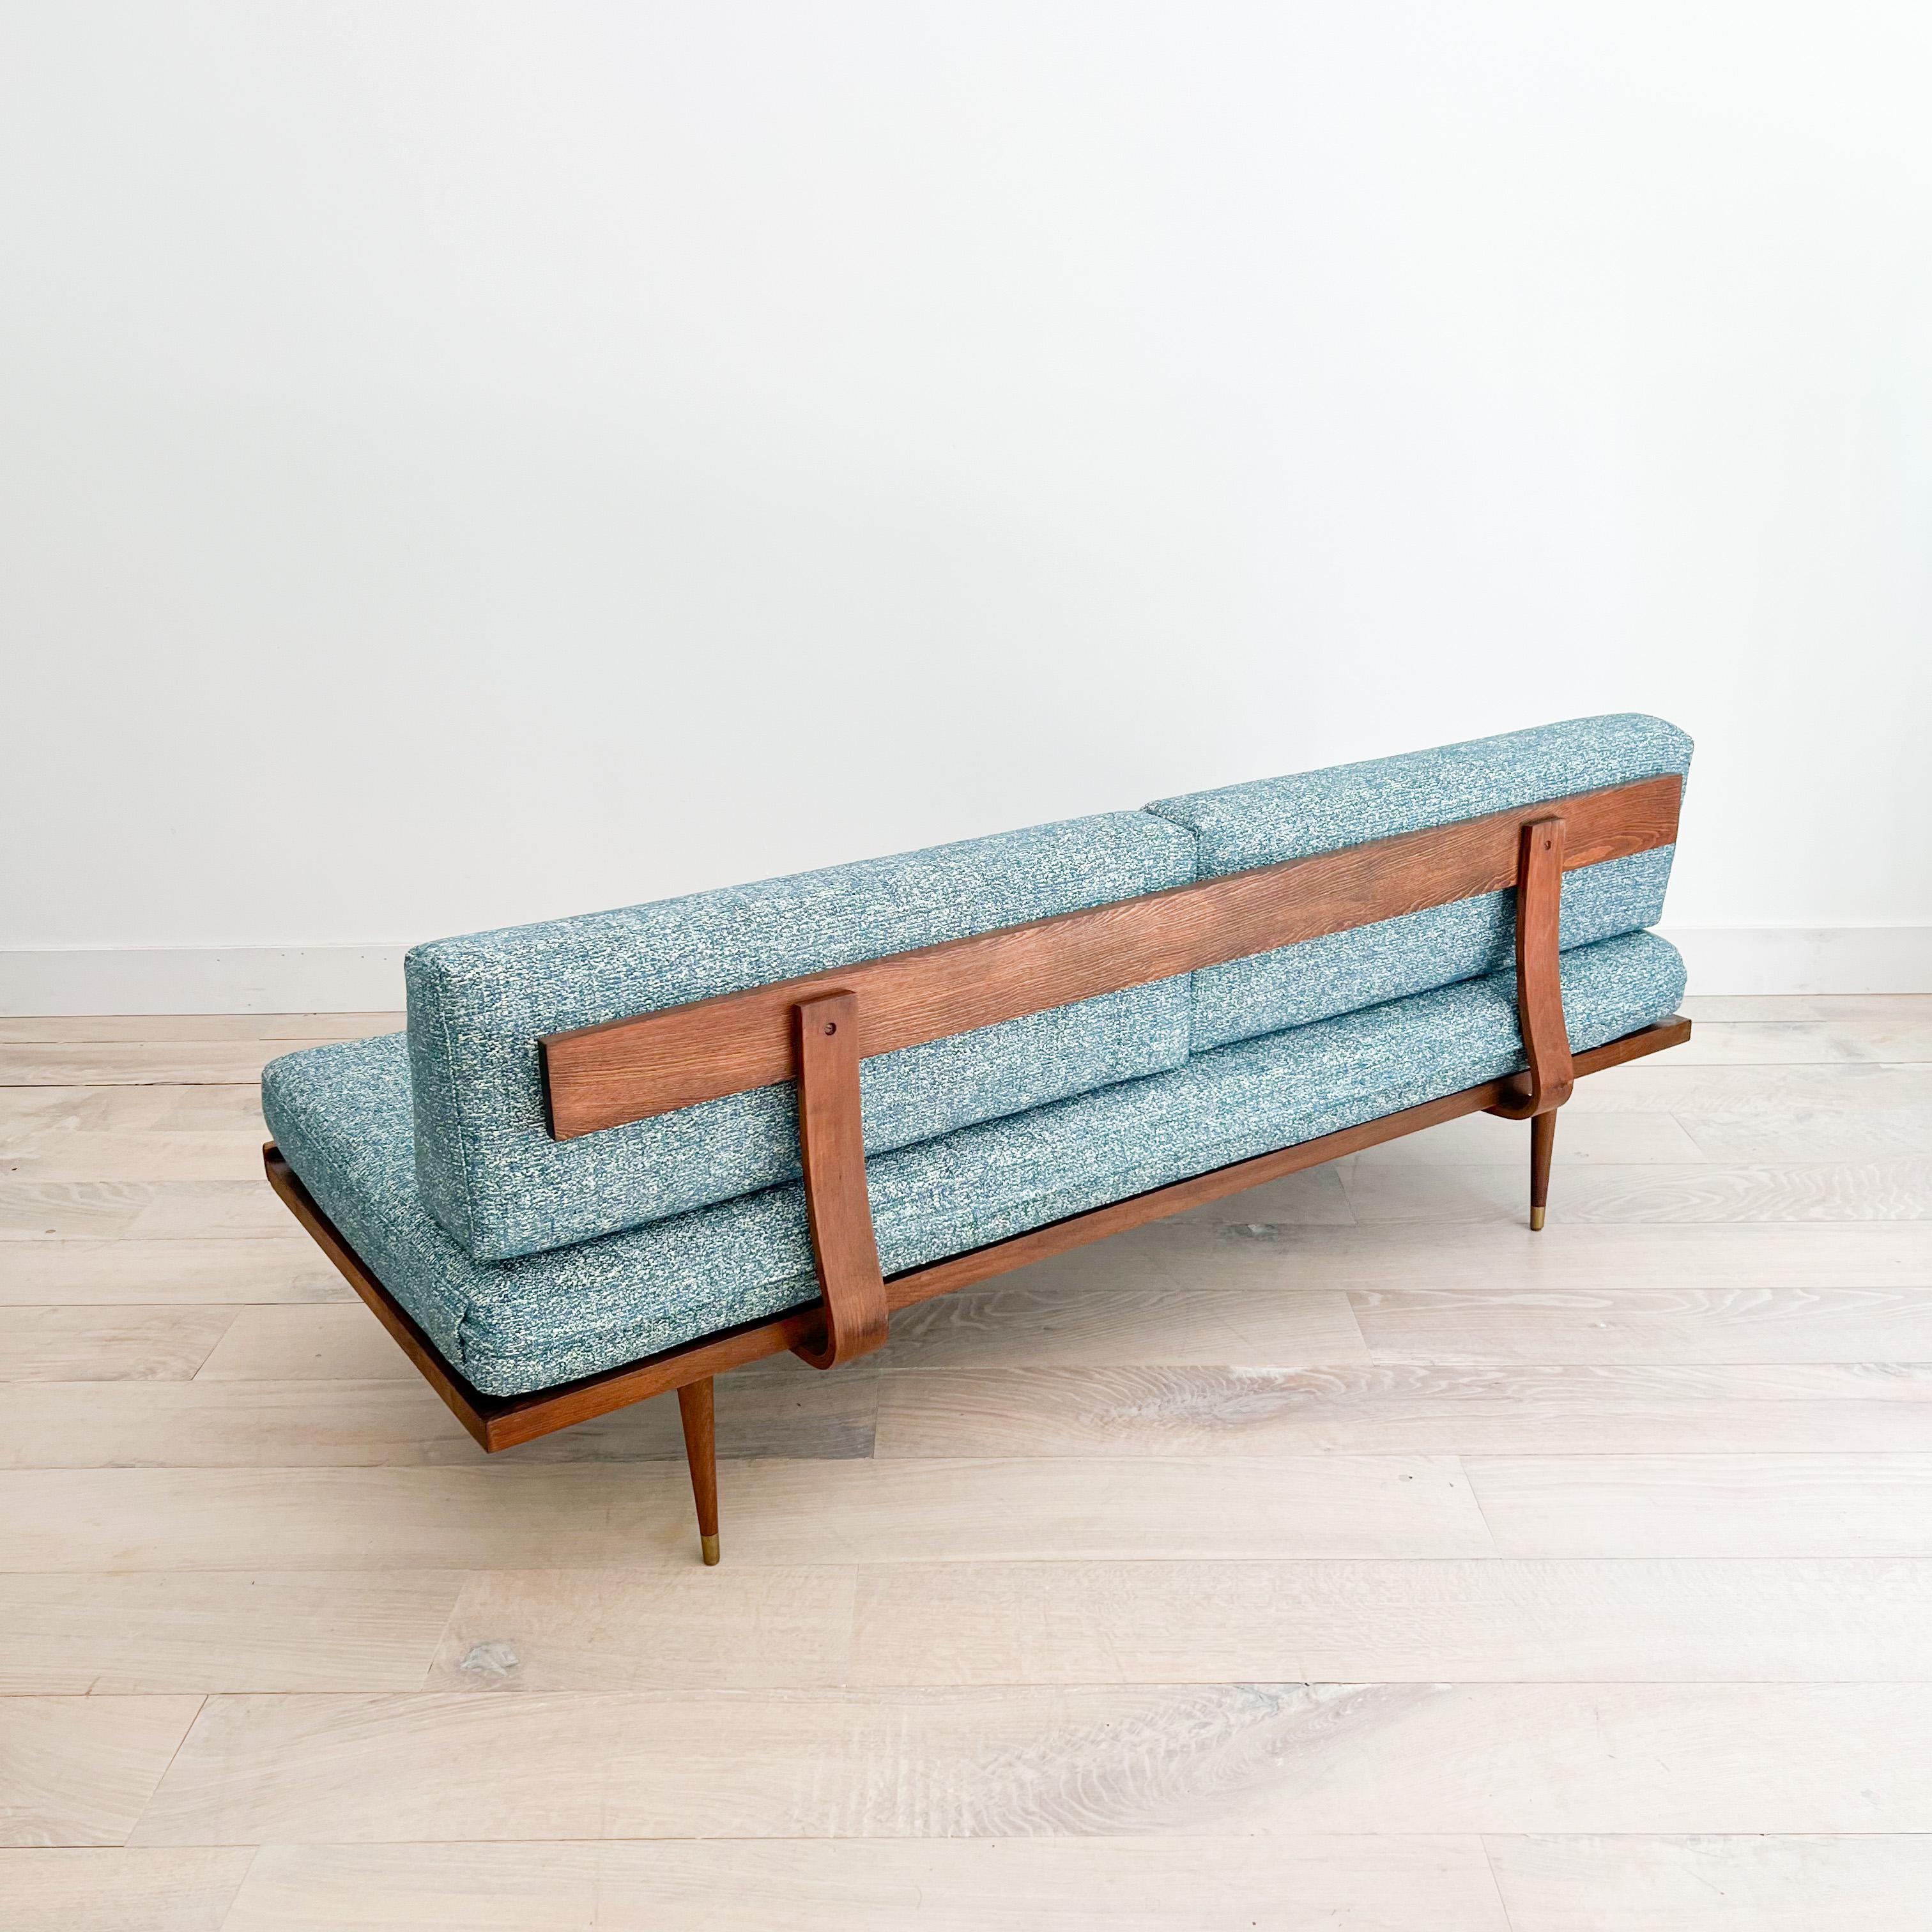 Mid-Century Modern sofa/daybed - made in Yugoslavia. New foam and soft blue/white upholstery. Some light scuffing/scratching to the wooden frame from age appropriate wear. The original webbing is in good condition.